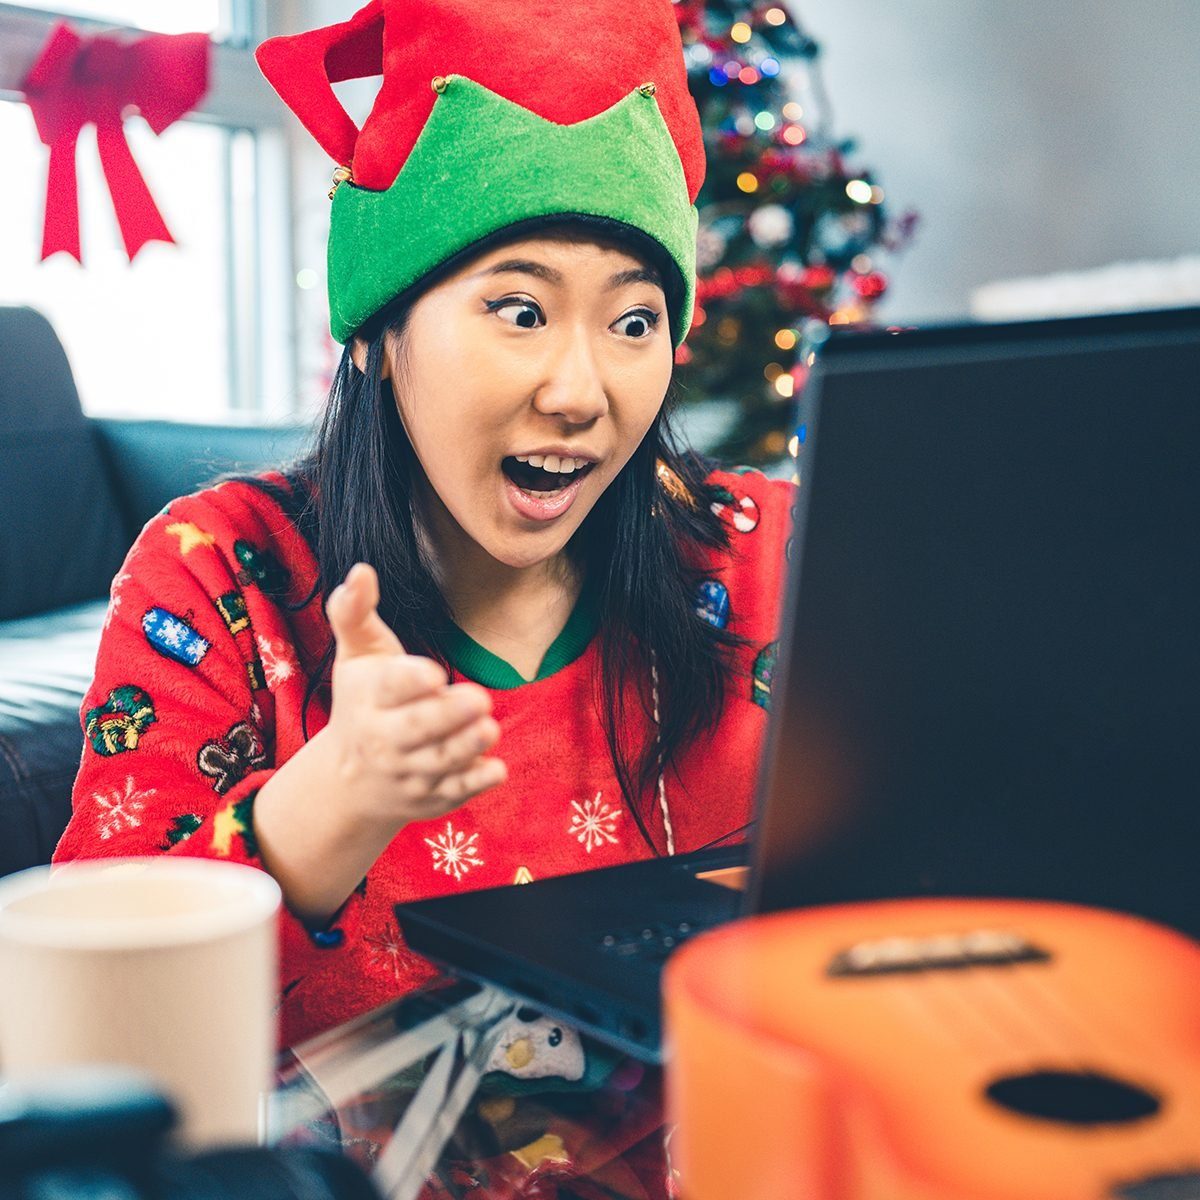 Millennial Christmas party in season costumes. Interior of modern apartment with Christmas decorations. Portrait of a young Chinese woman looking at laptop